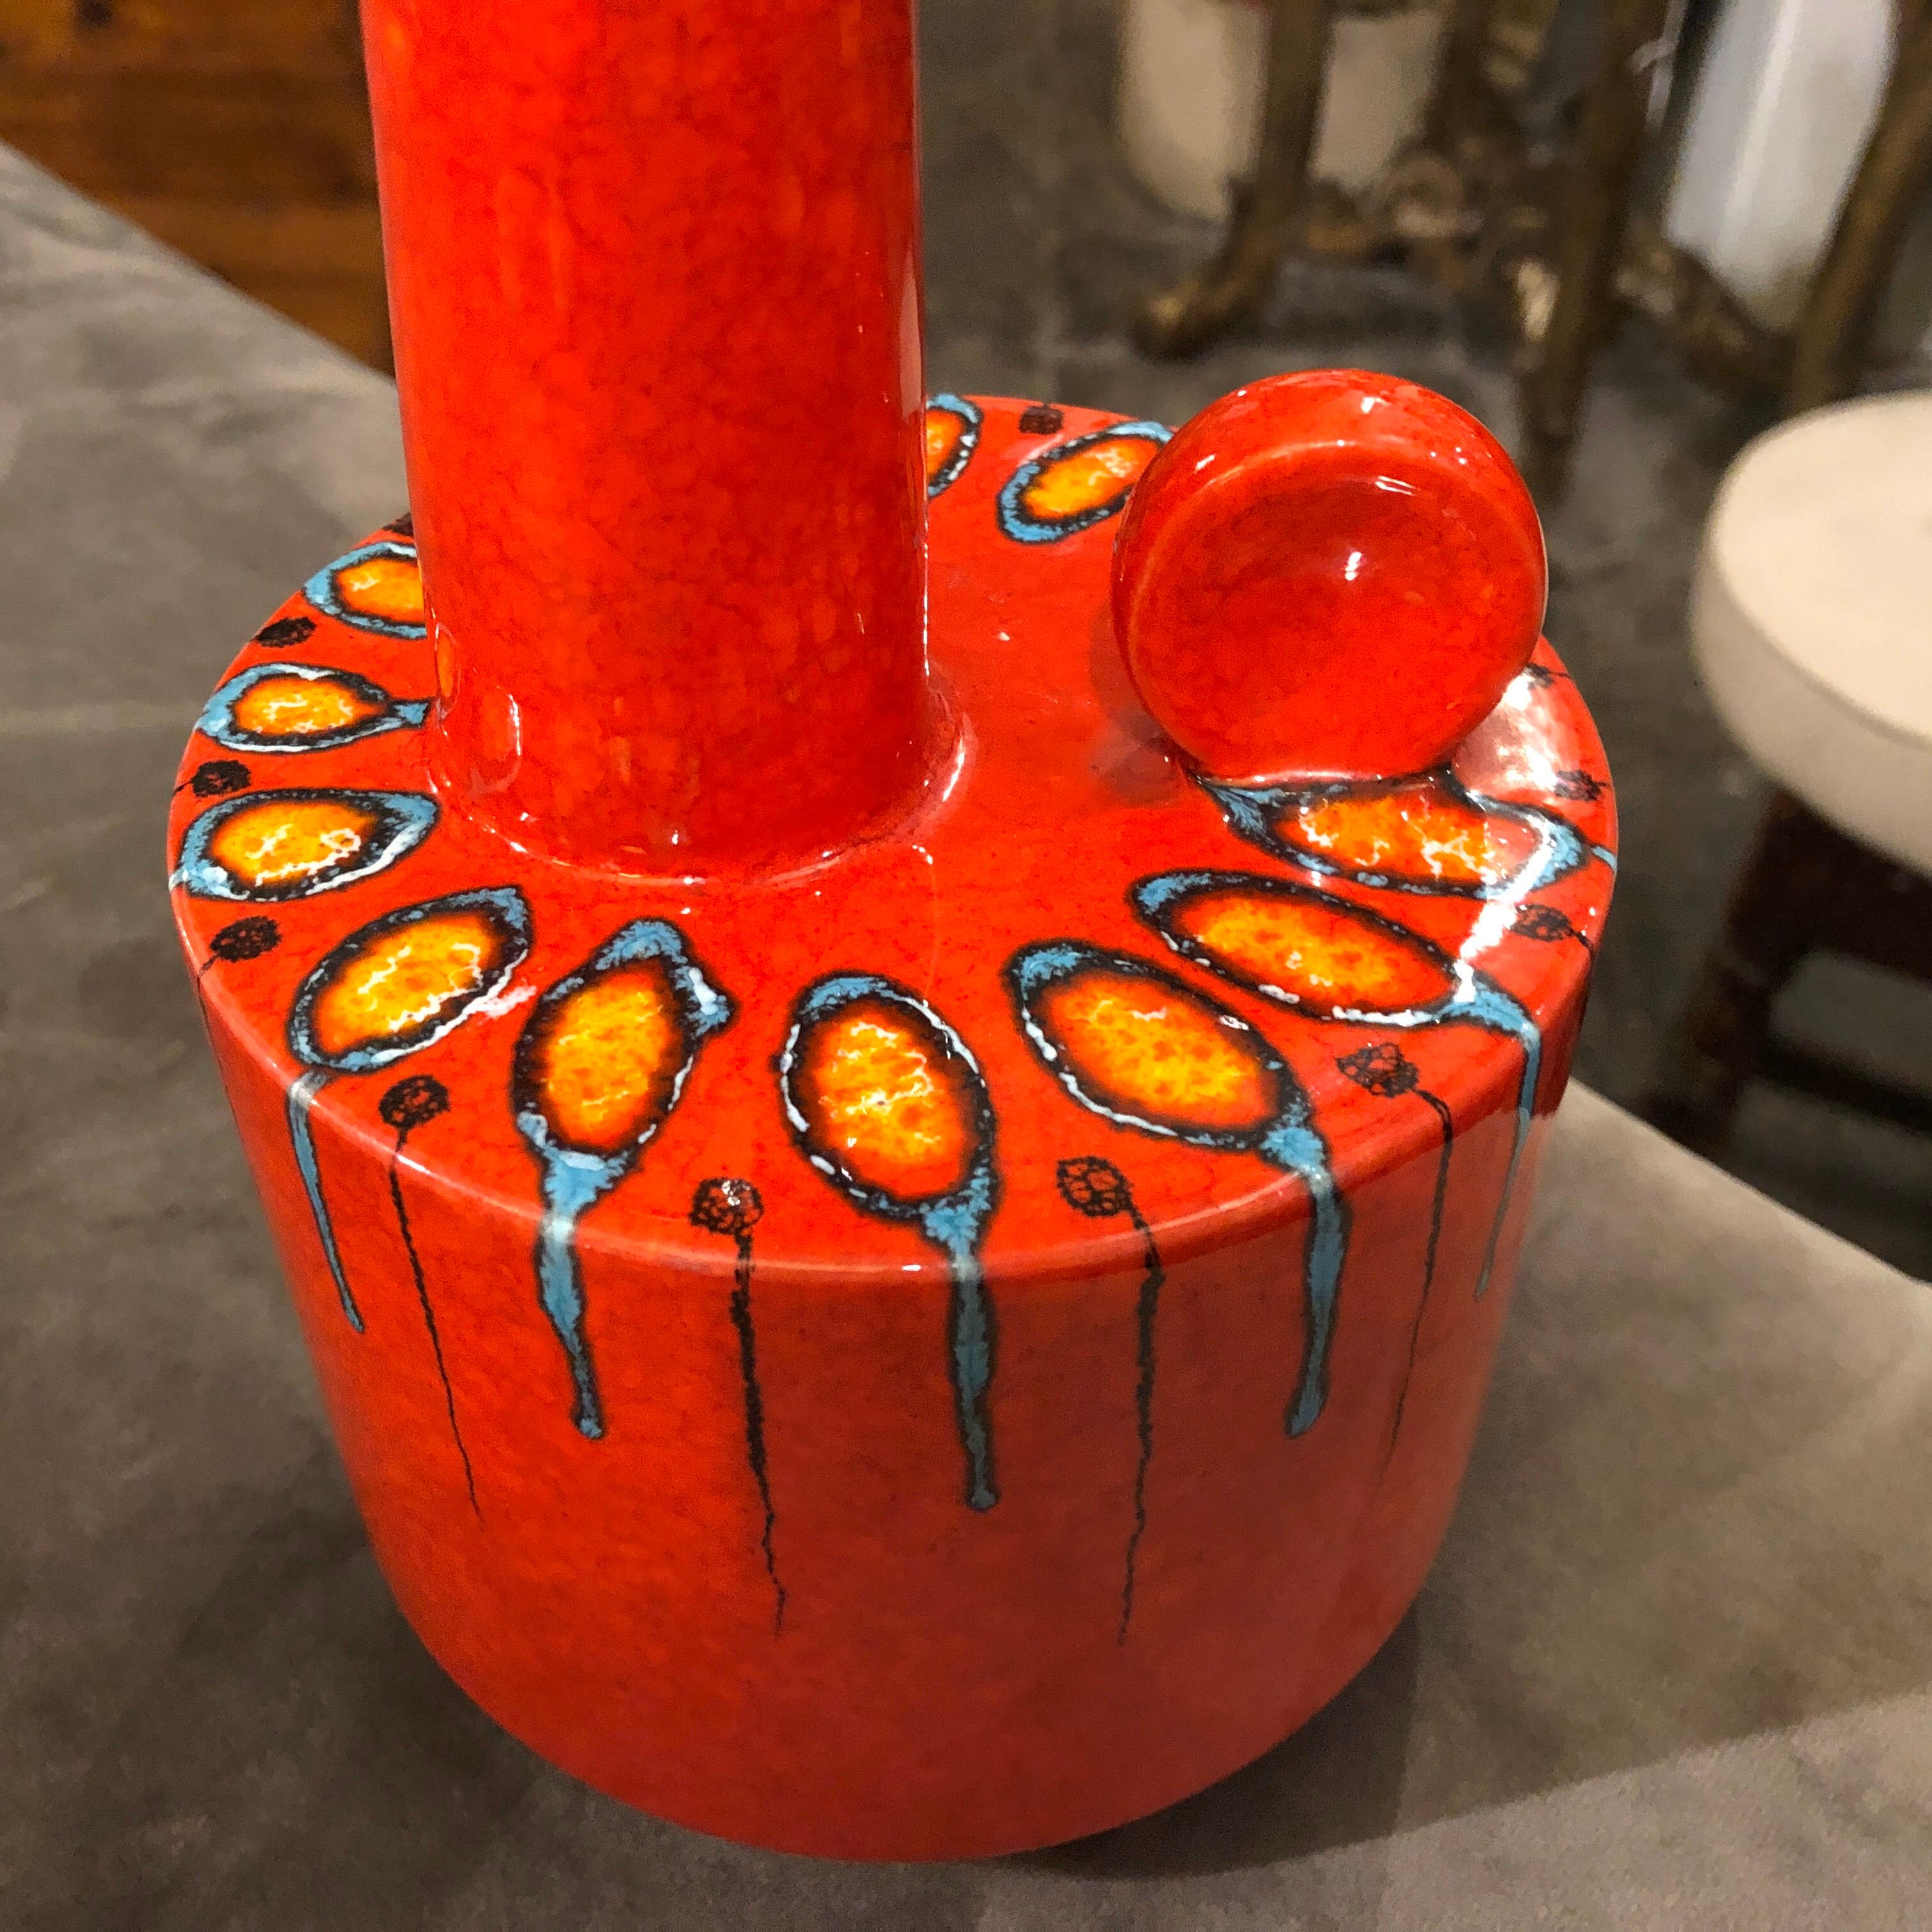 A very particular red ceramic with multicolored decoration made by Bertoncello in the 1980s. It's in perfect conditions.